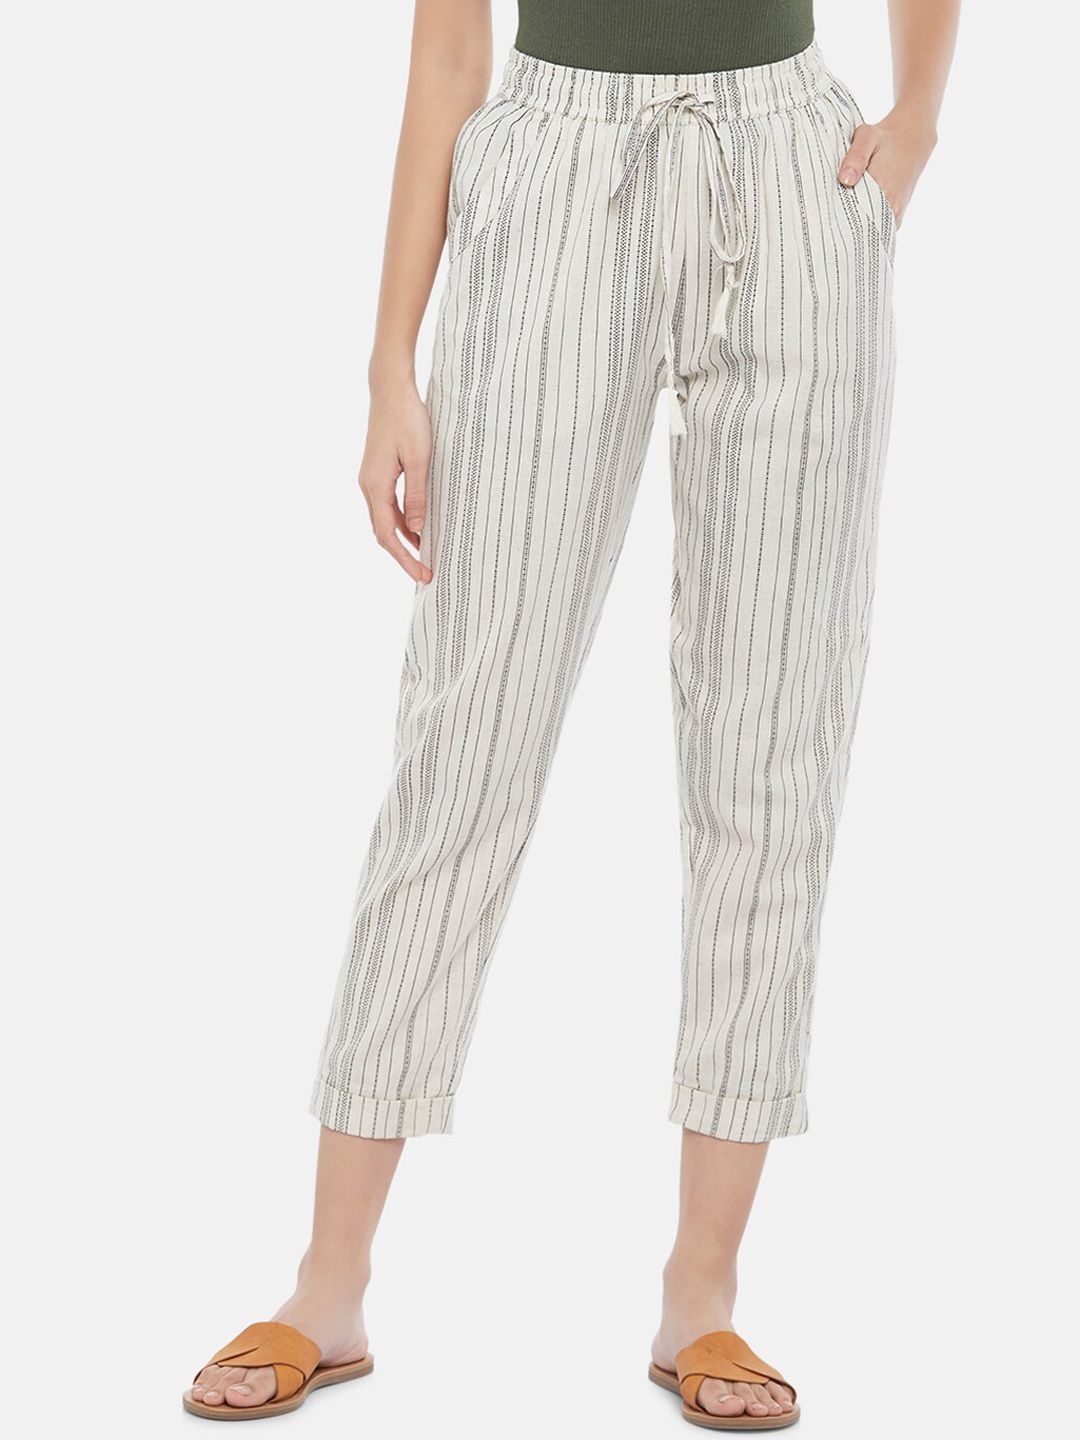 People Women Striped Cotton Trousers Price in India